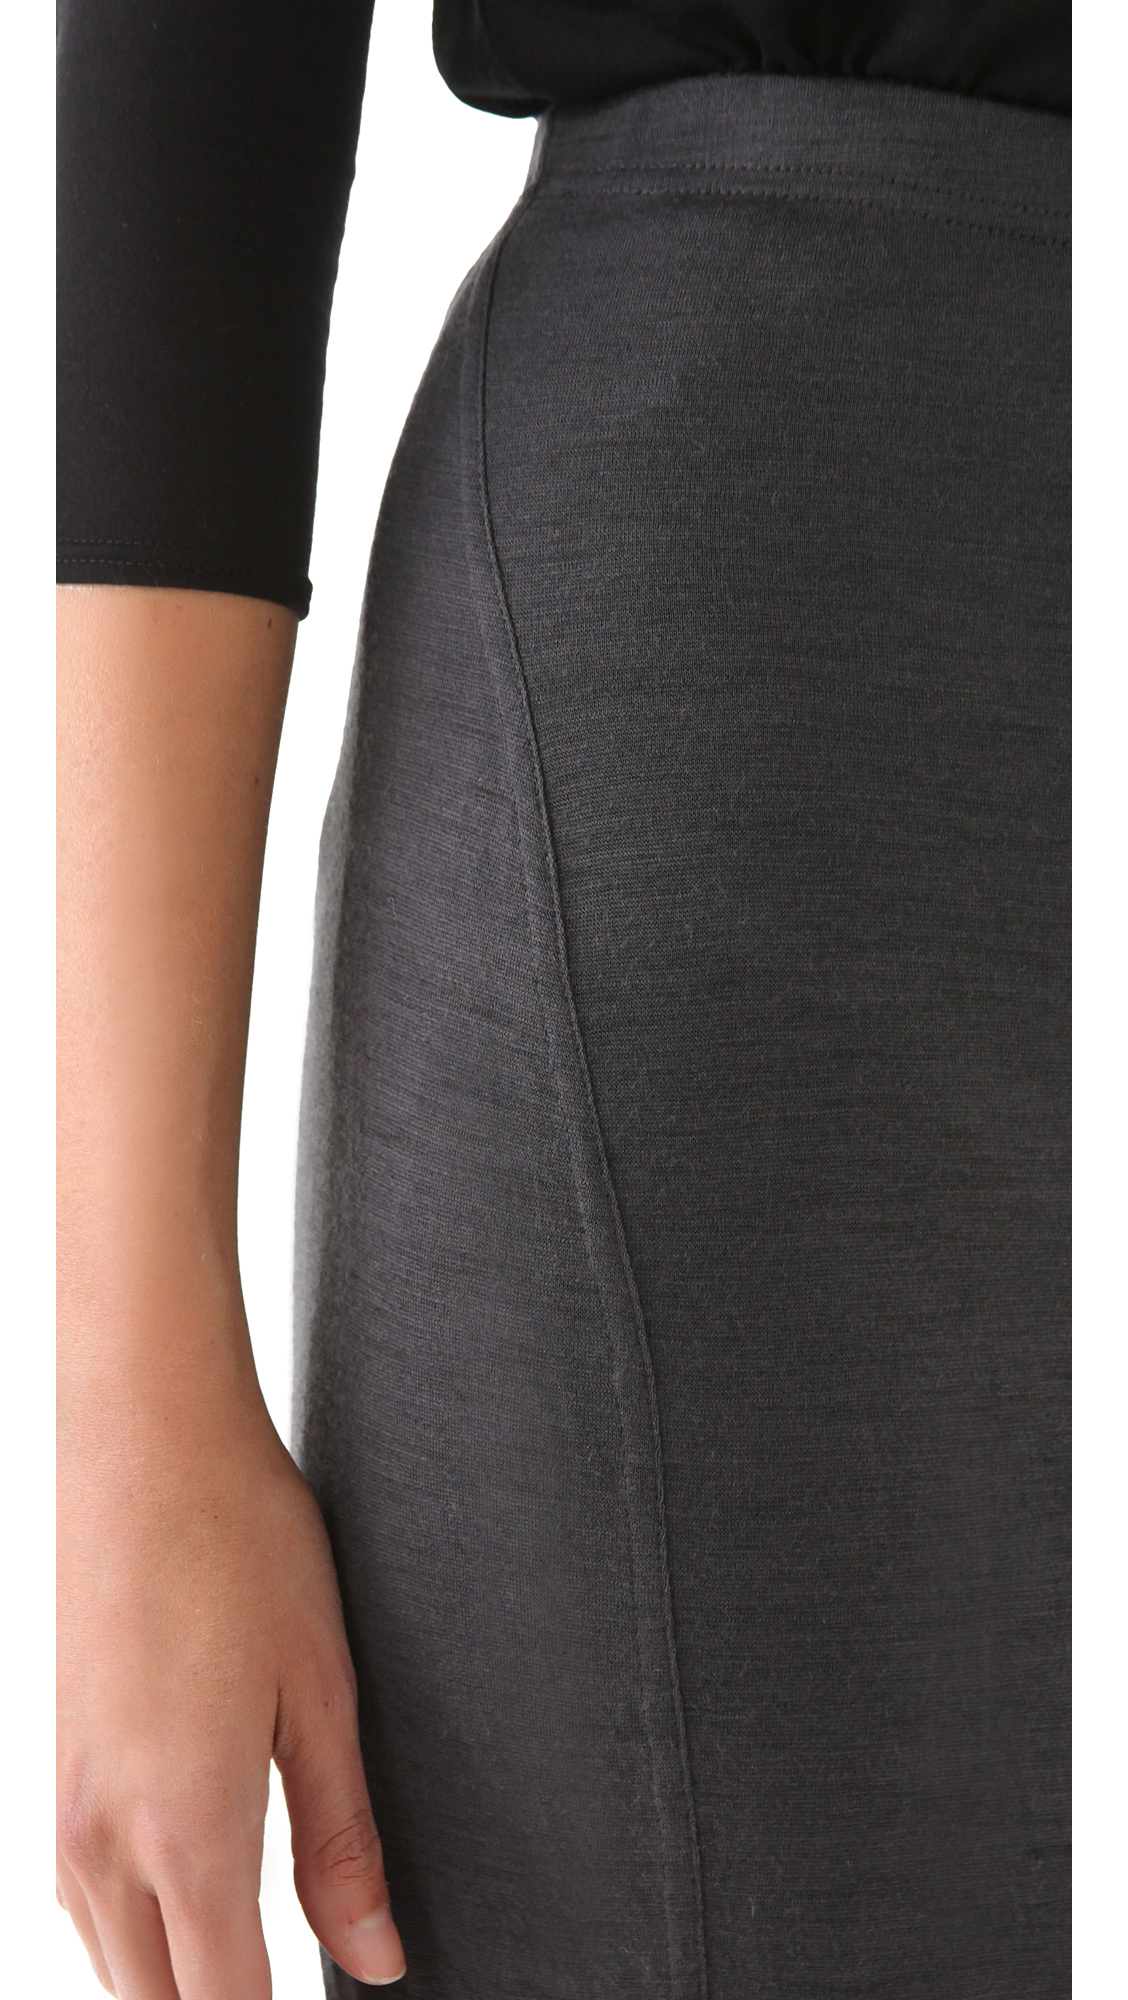 Lyst - Donna karan Two Tone Skirt in Gray